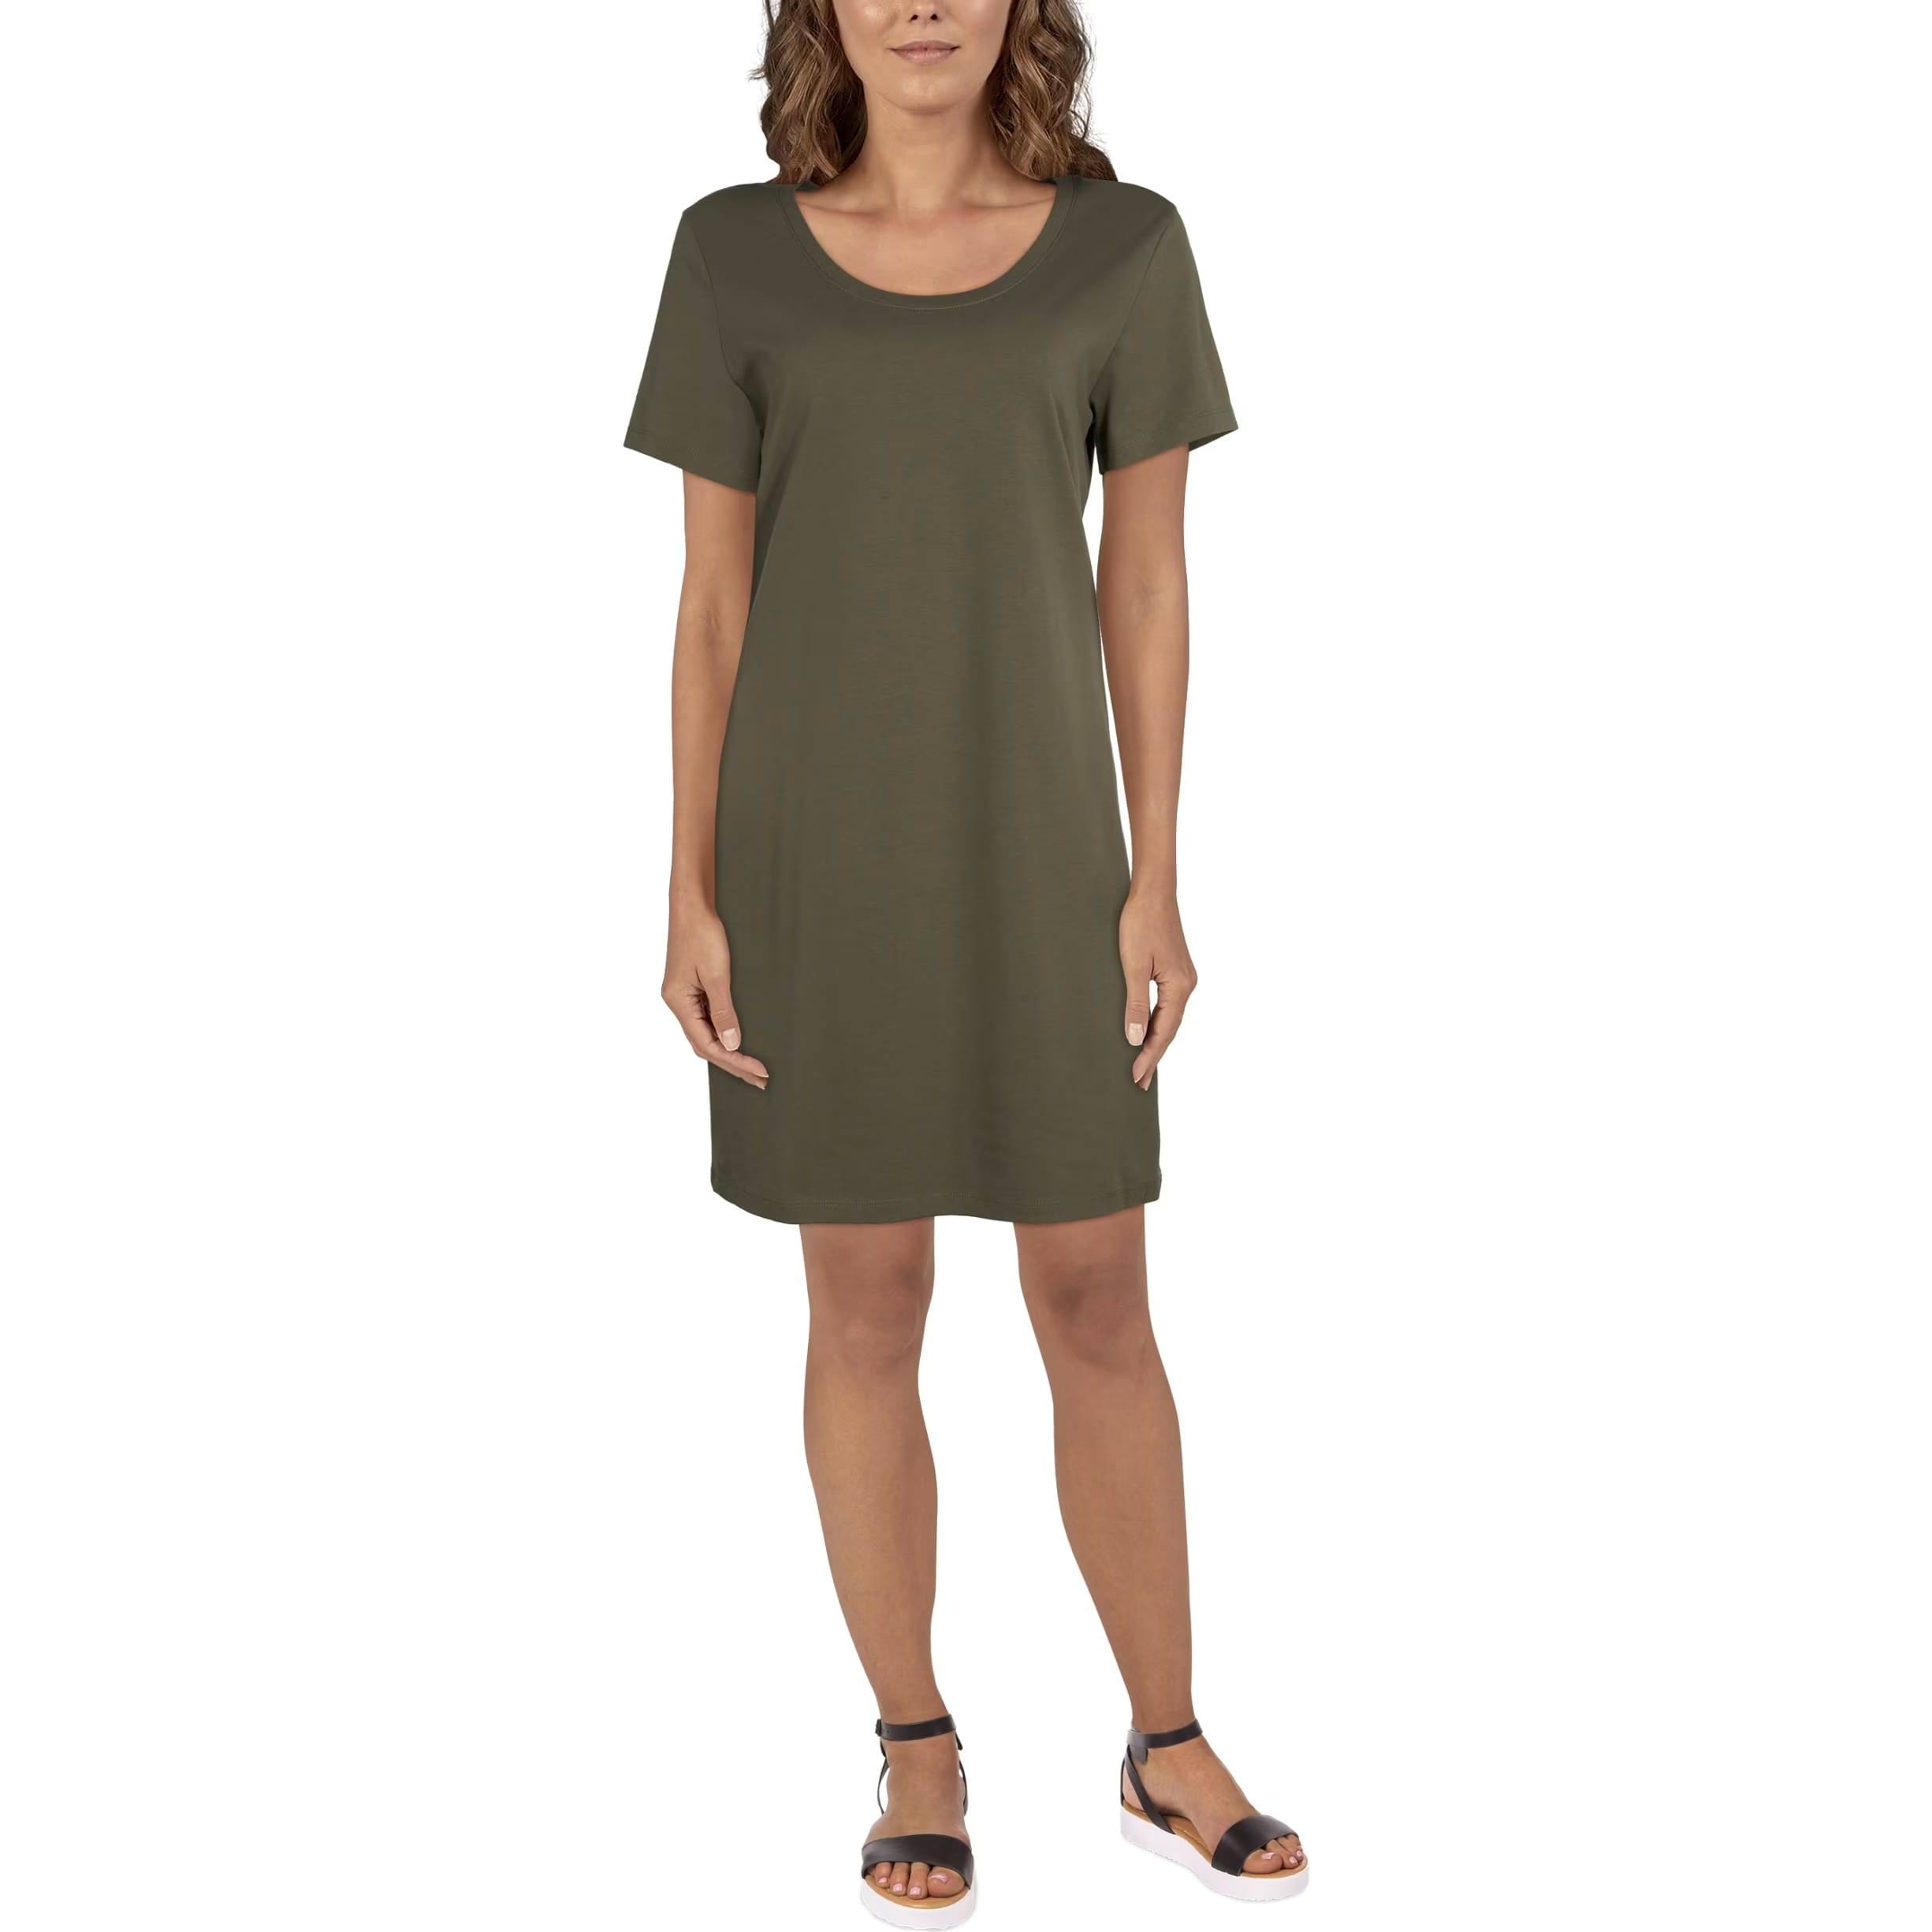 Comfy Breathable Women's Summer Dress in Dusty Olive | Image